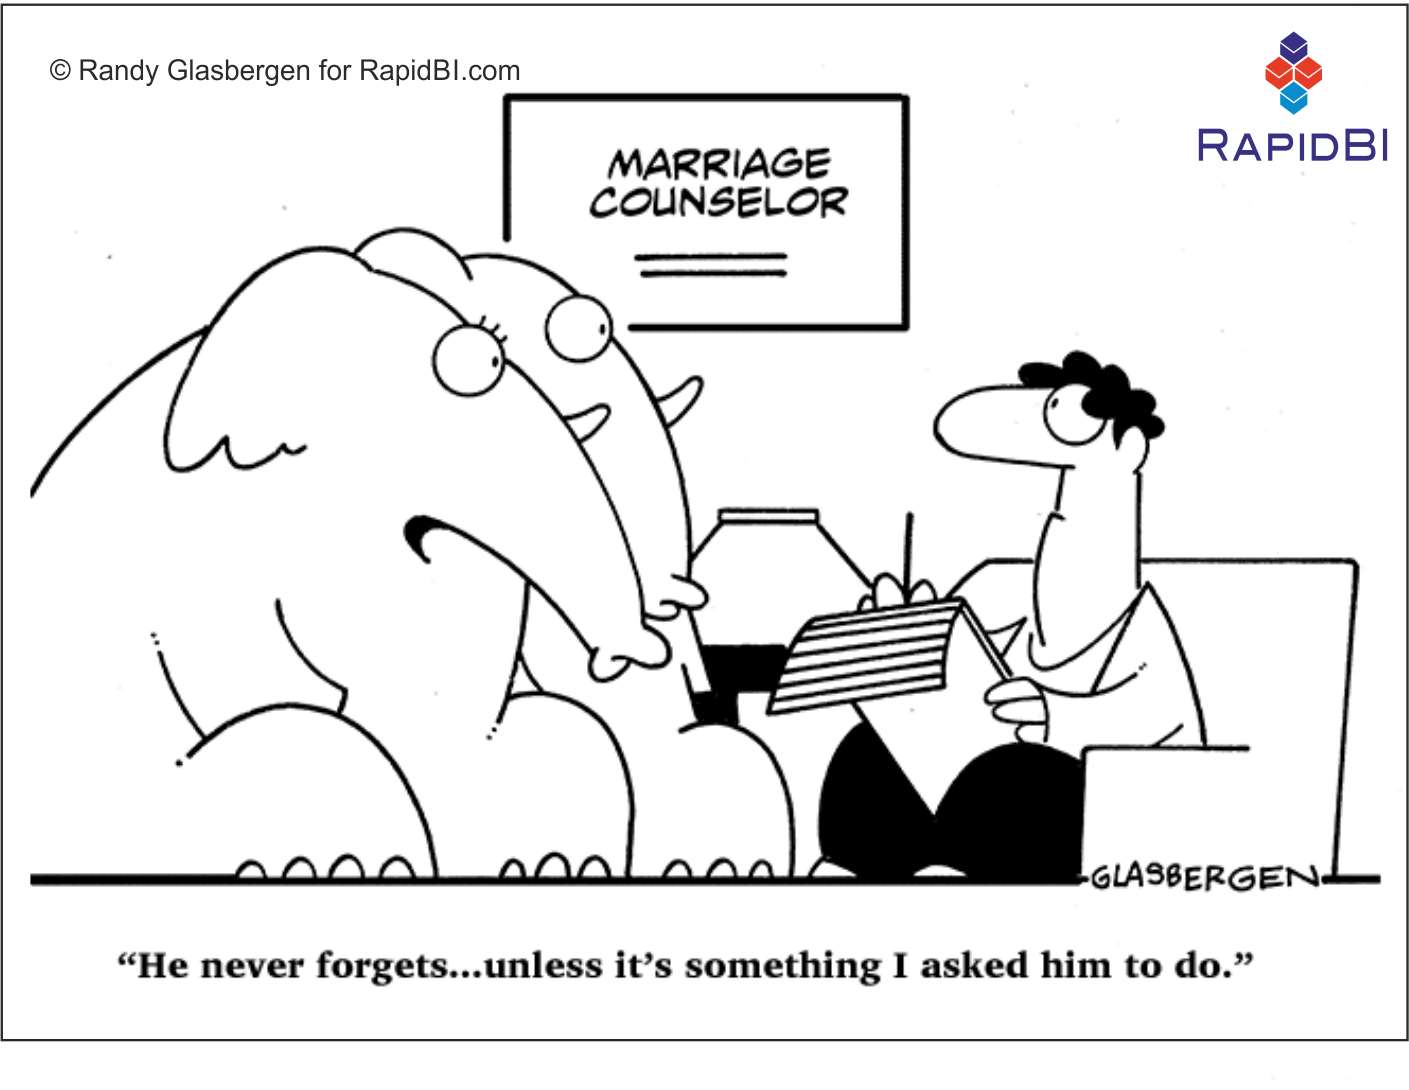 RapidBI Daily Cartoon #6 A look at the lighter side of work life